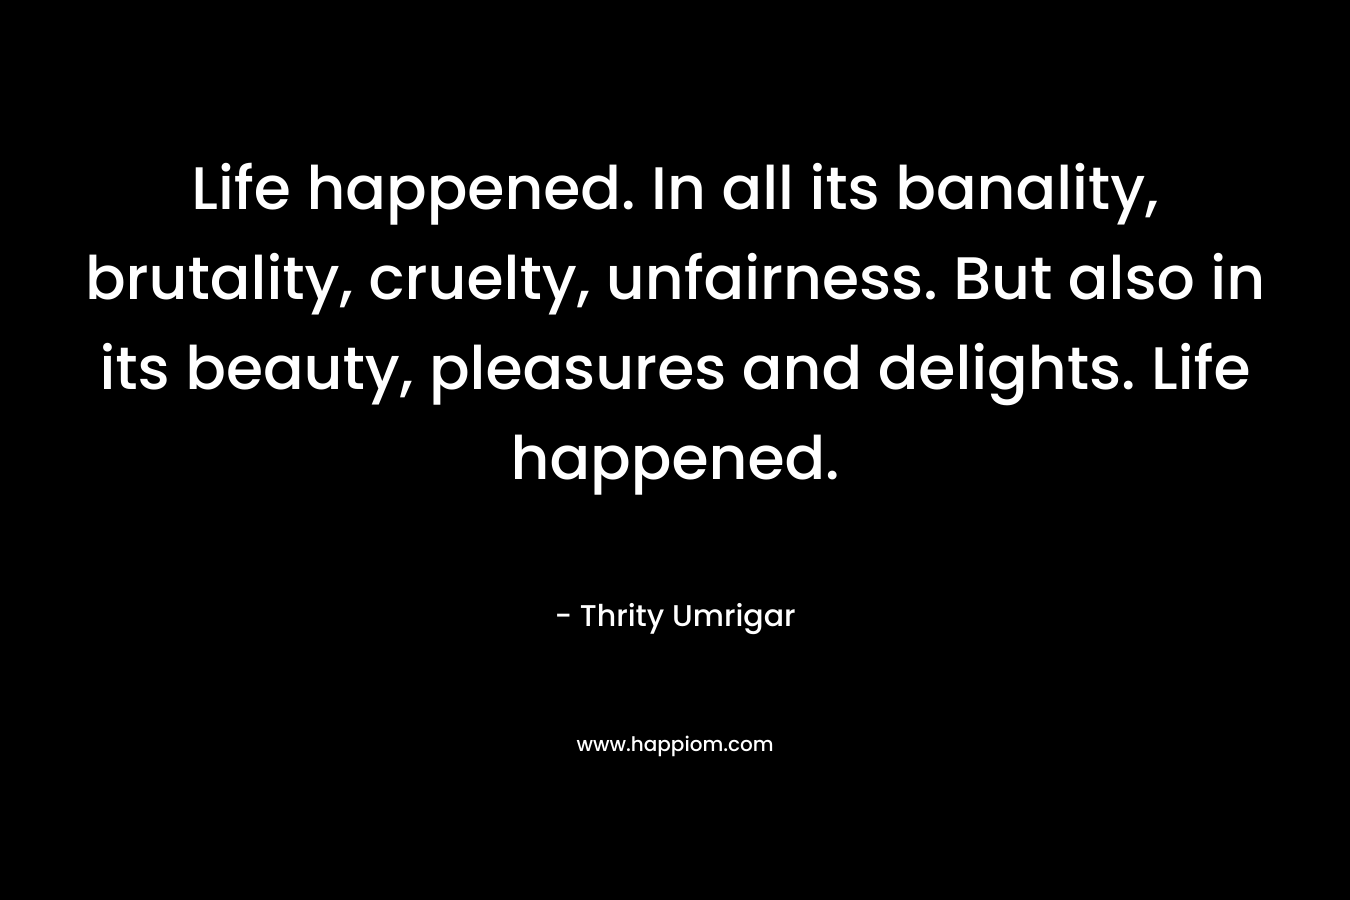 Life happened. In all its banality, brutality, cruelty, unfairness. But also in its beauty, pleasures and delights. Life happened.